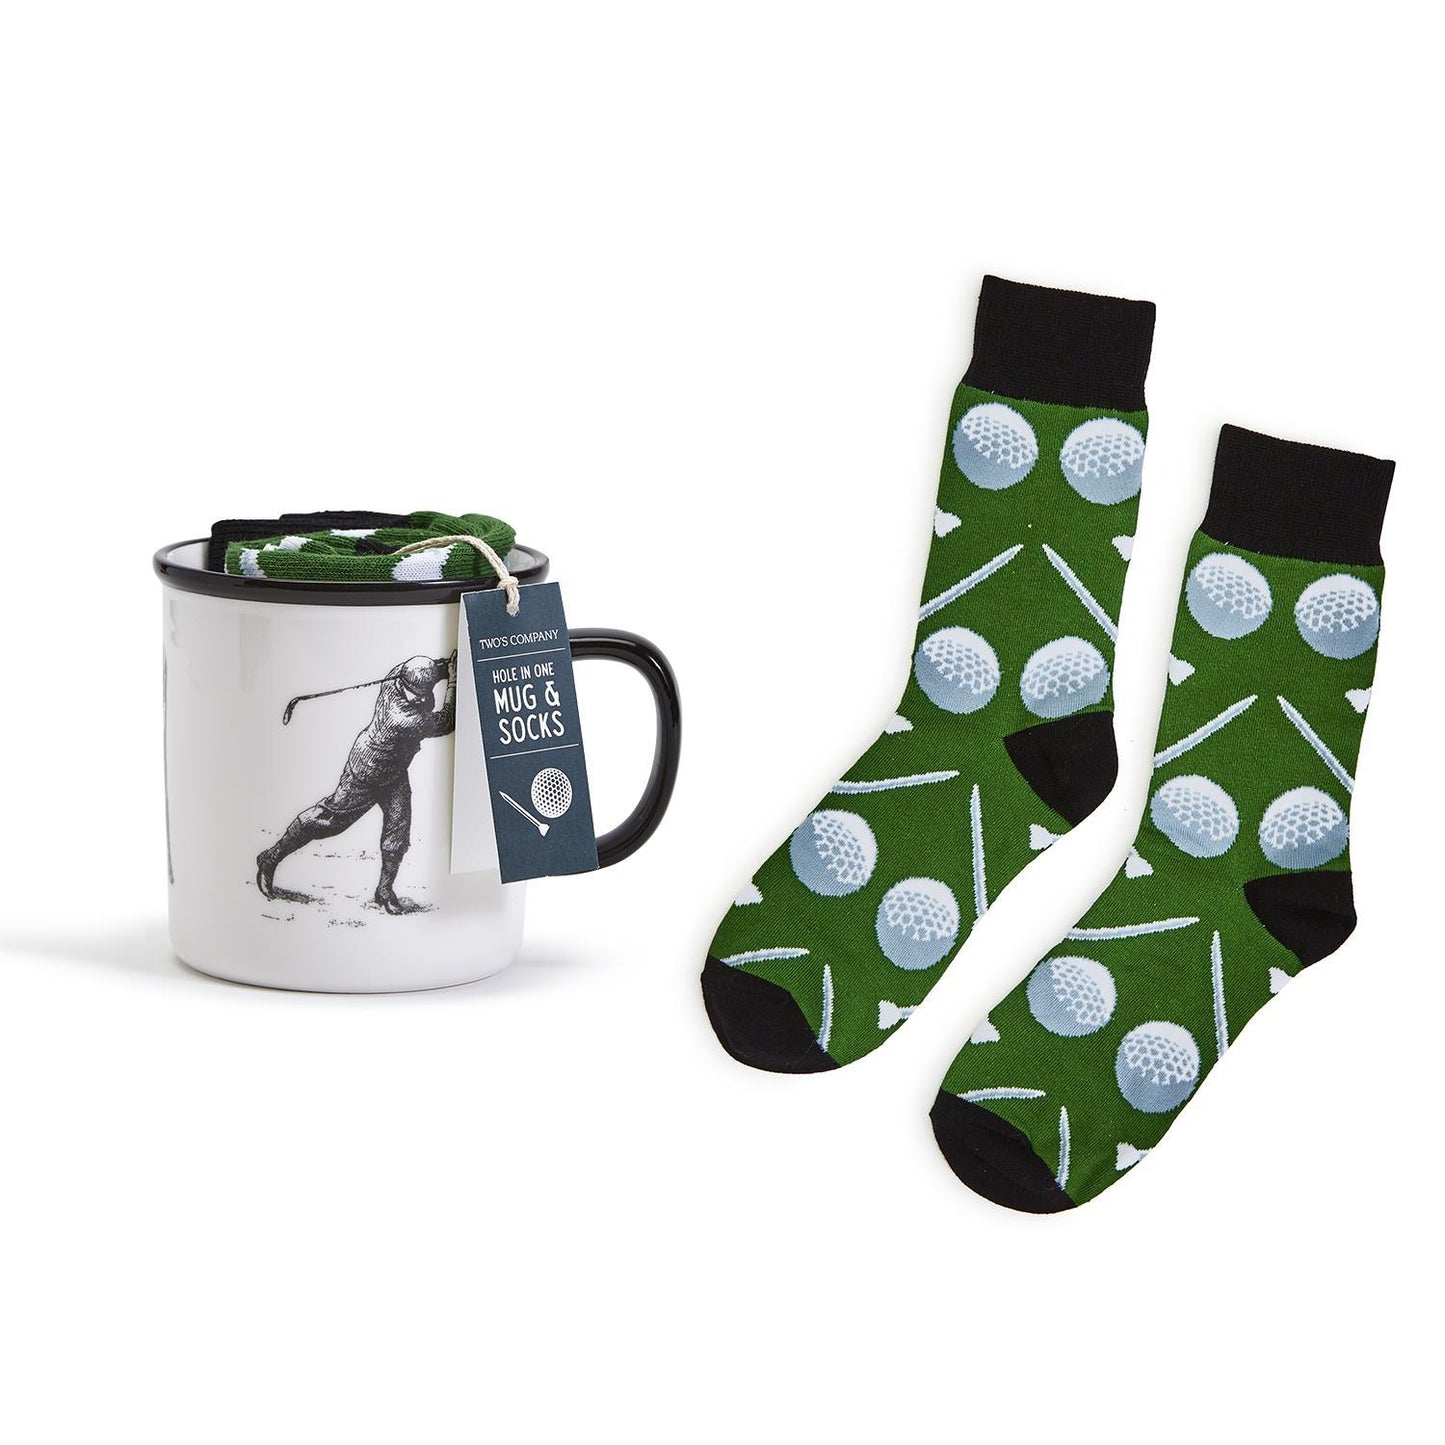 Two's Company Hole-In-One Mug And Pair Of Socks Gift Set